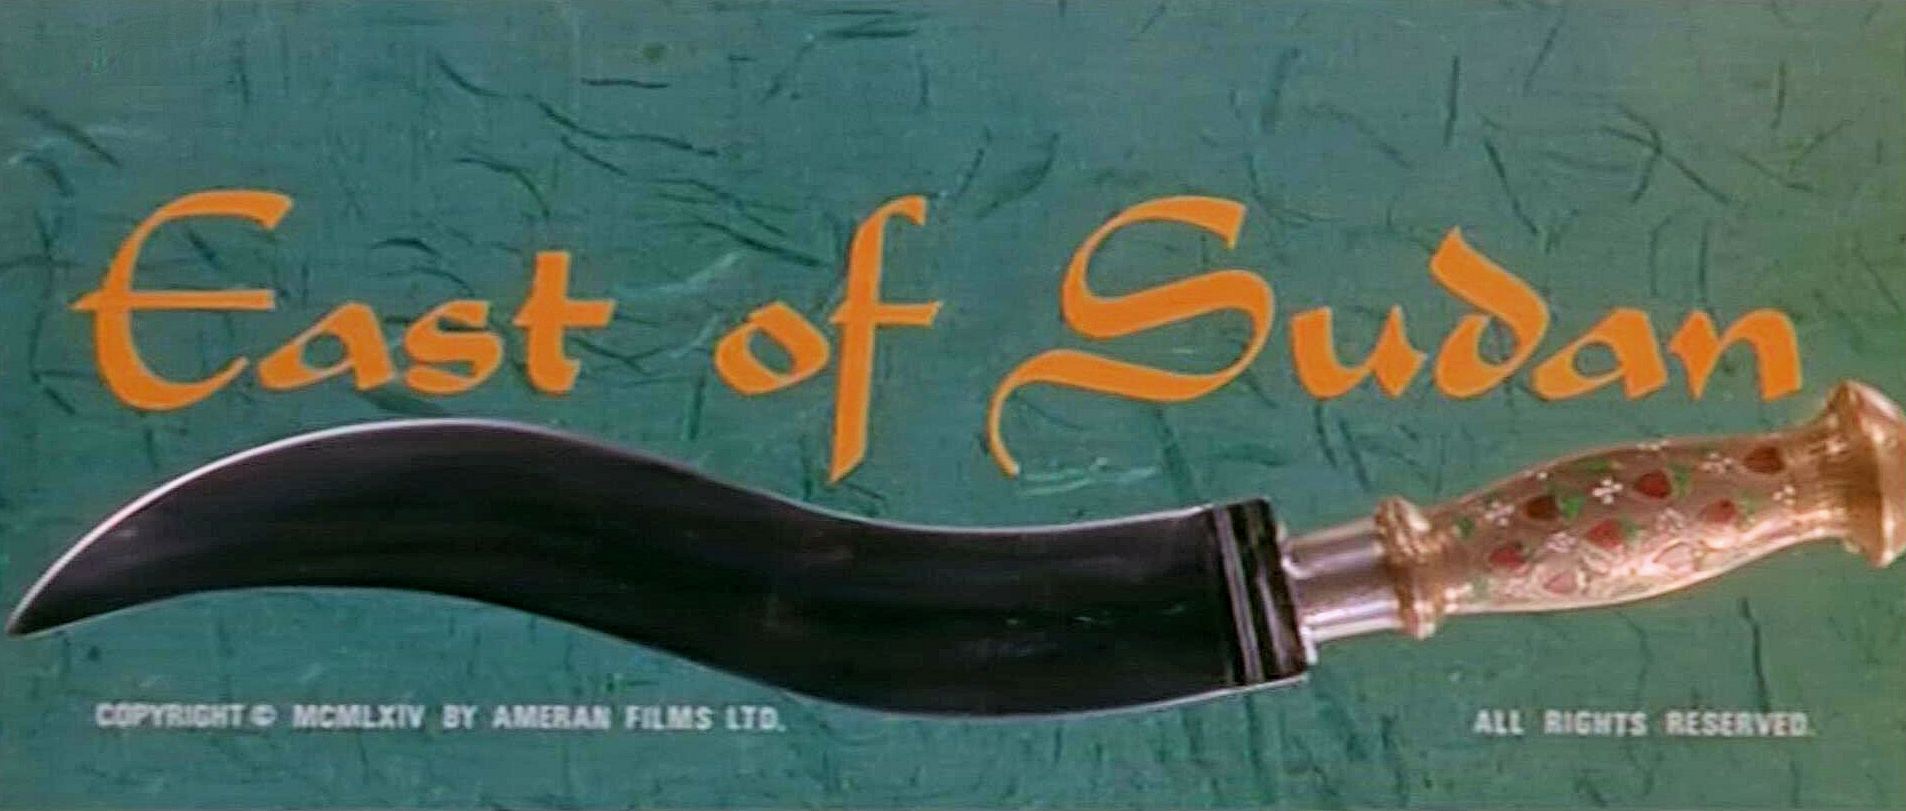 Main title from East of Sudan (1964) (3)